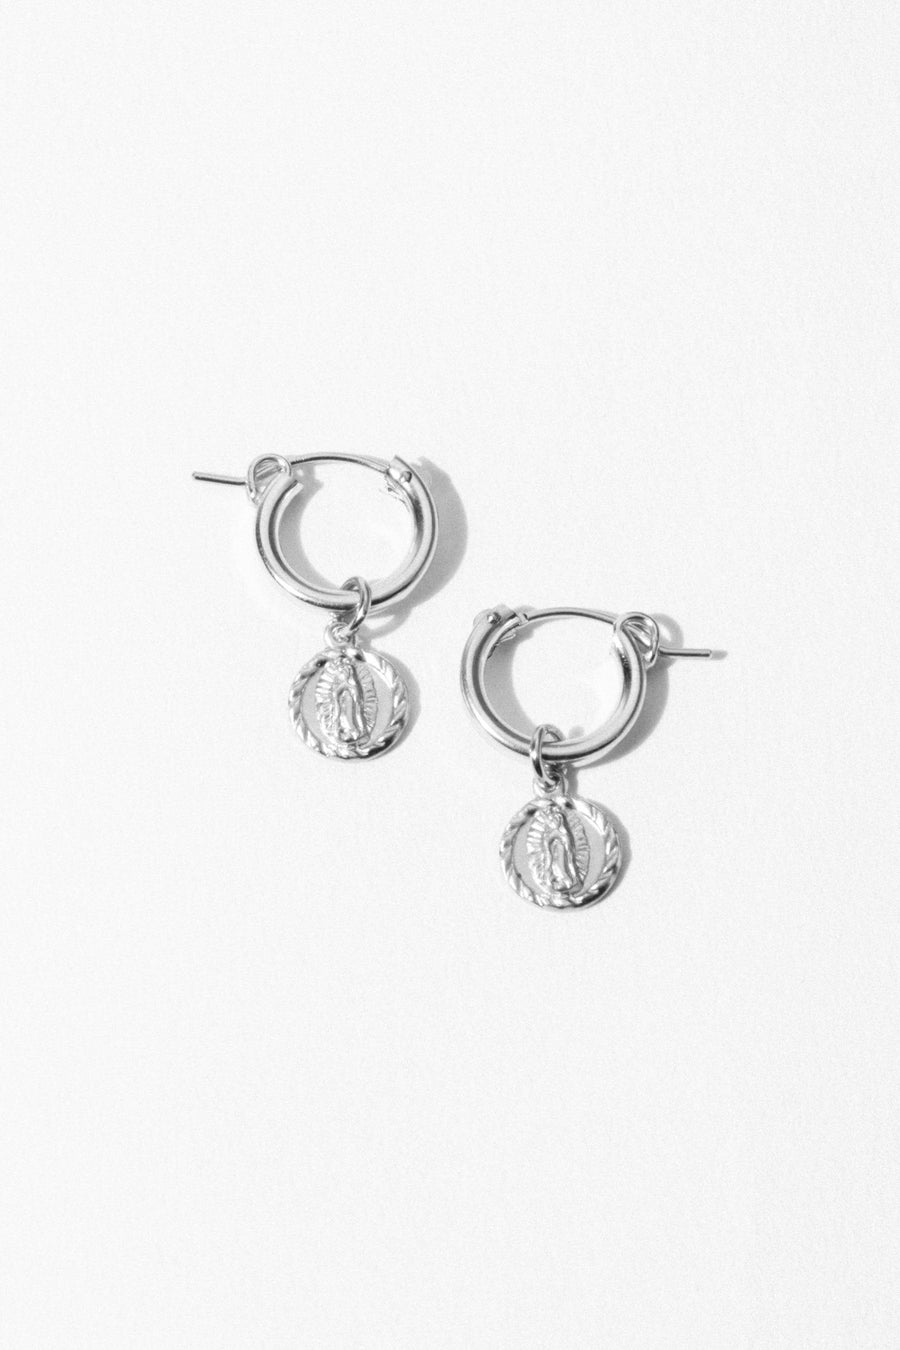 CGM Jewelry Silver Lady Guadalupe Earrings